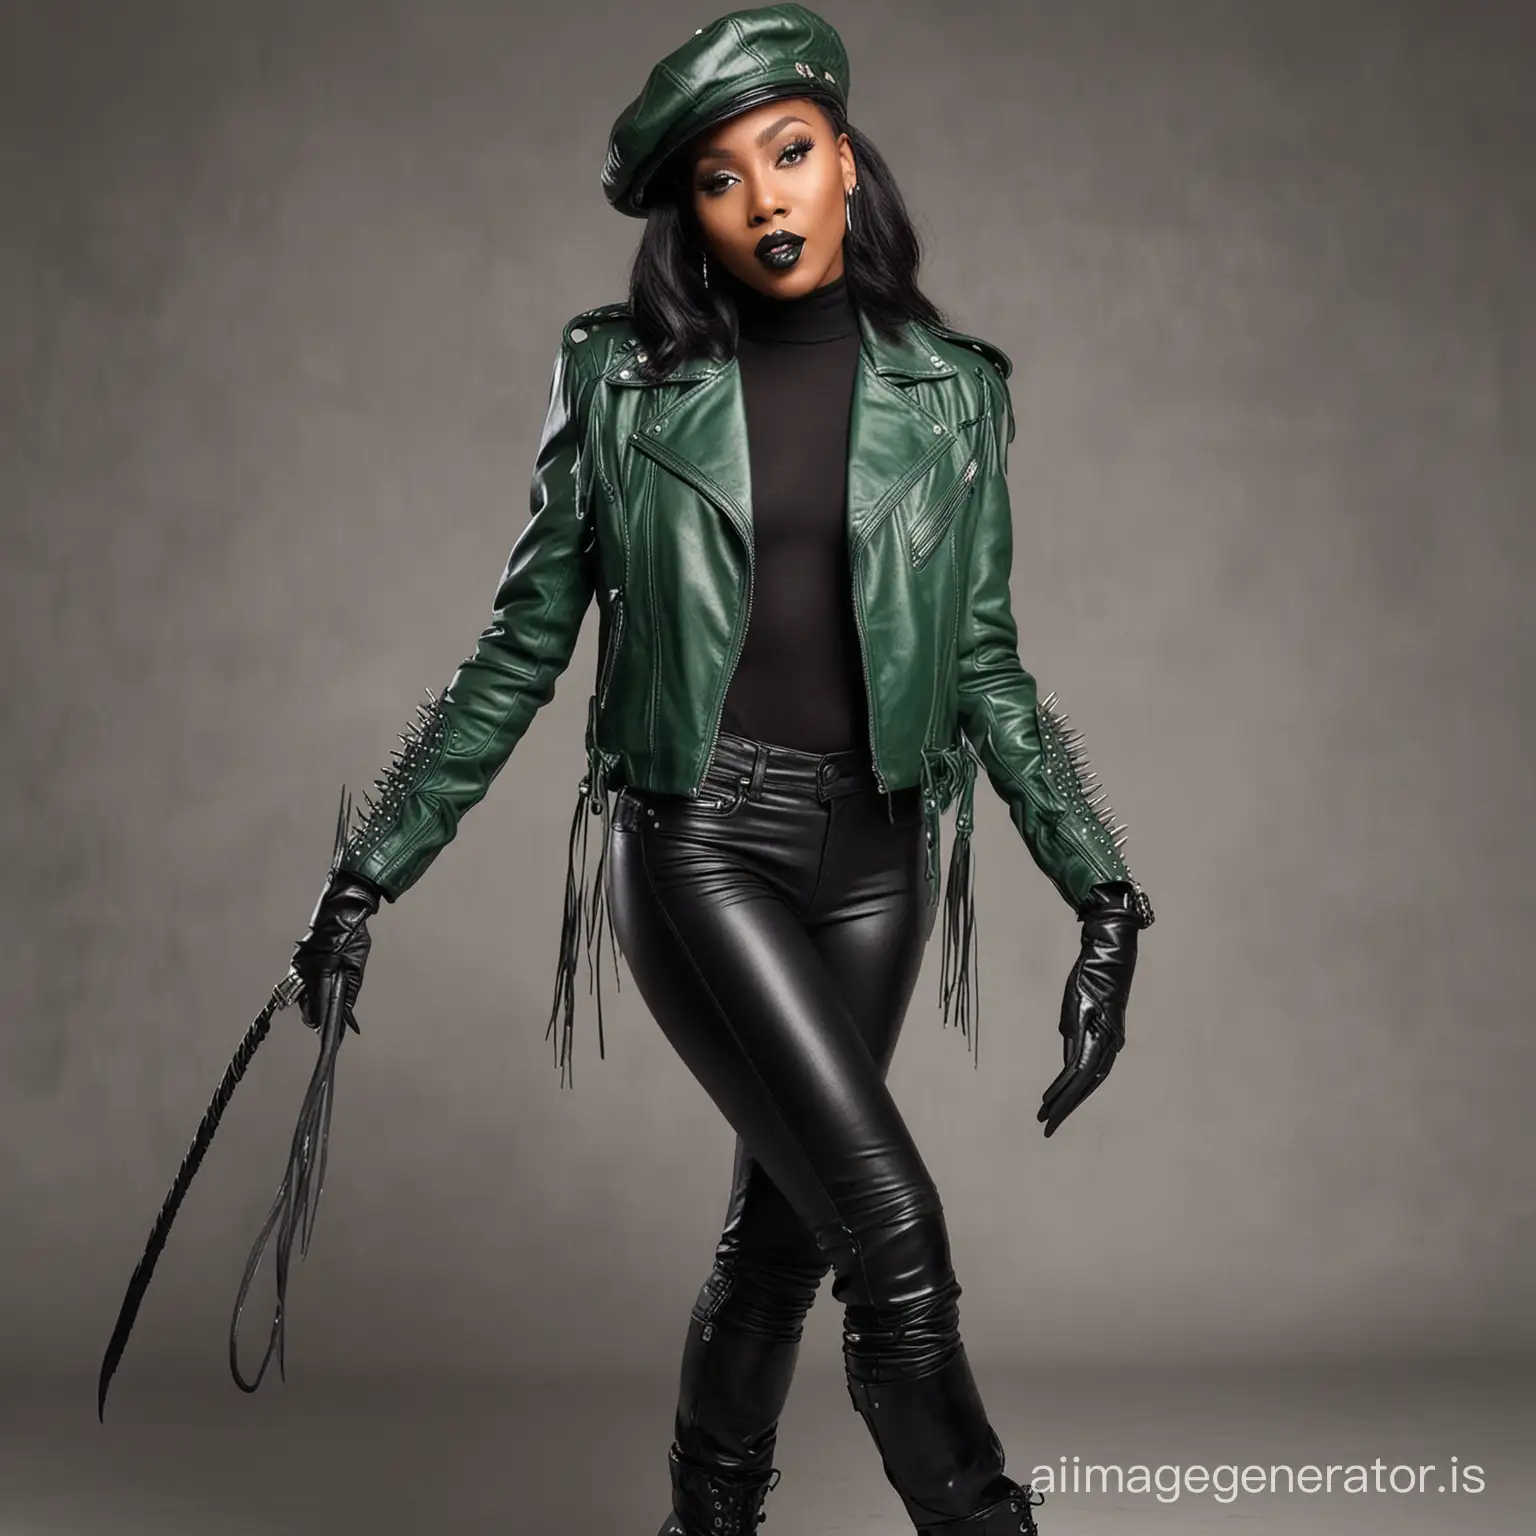 ebony woman in black leather gloves, spiked green motorcycle jacket. and black lipstick, leather masters cap, high heel leather boots, holding leather whip